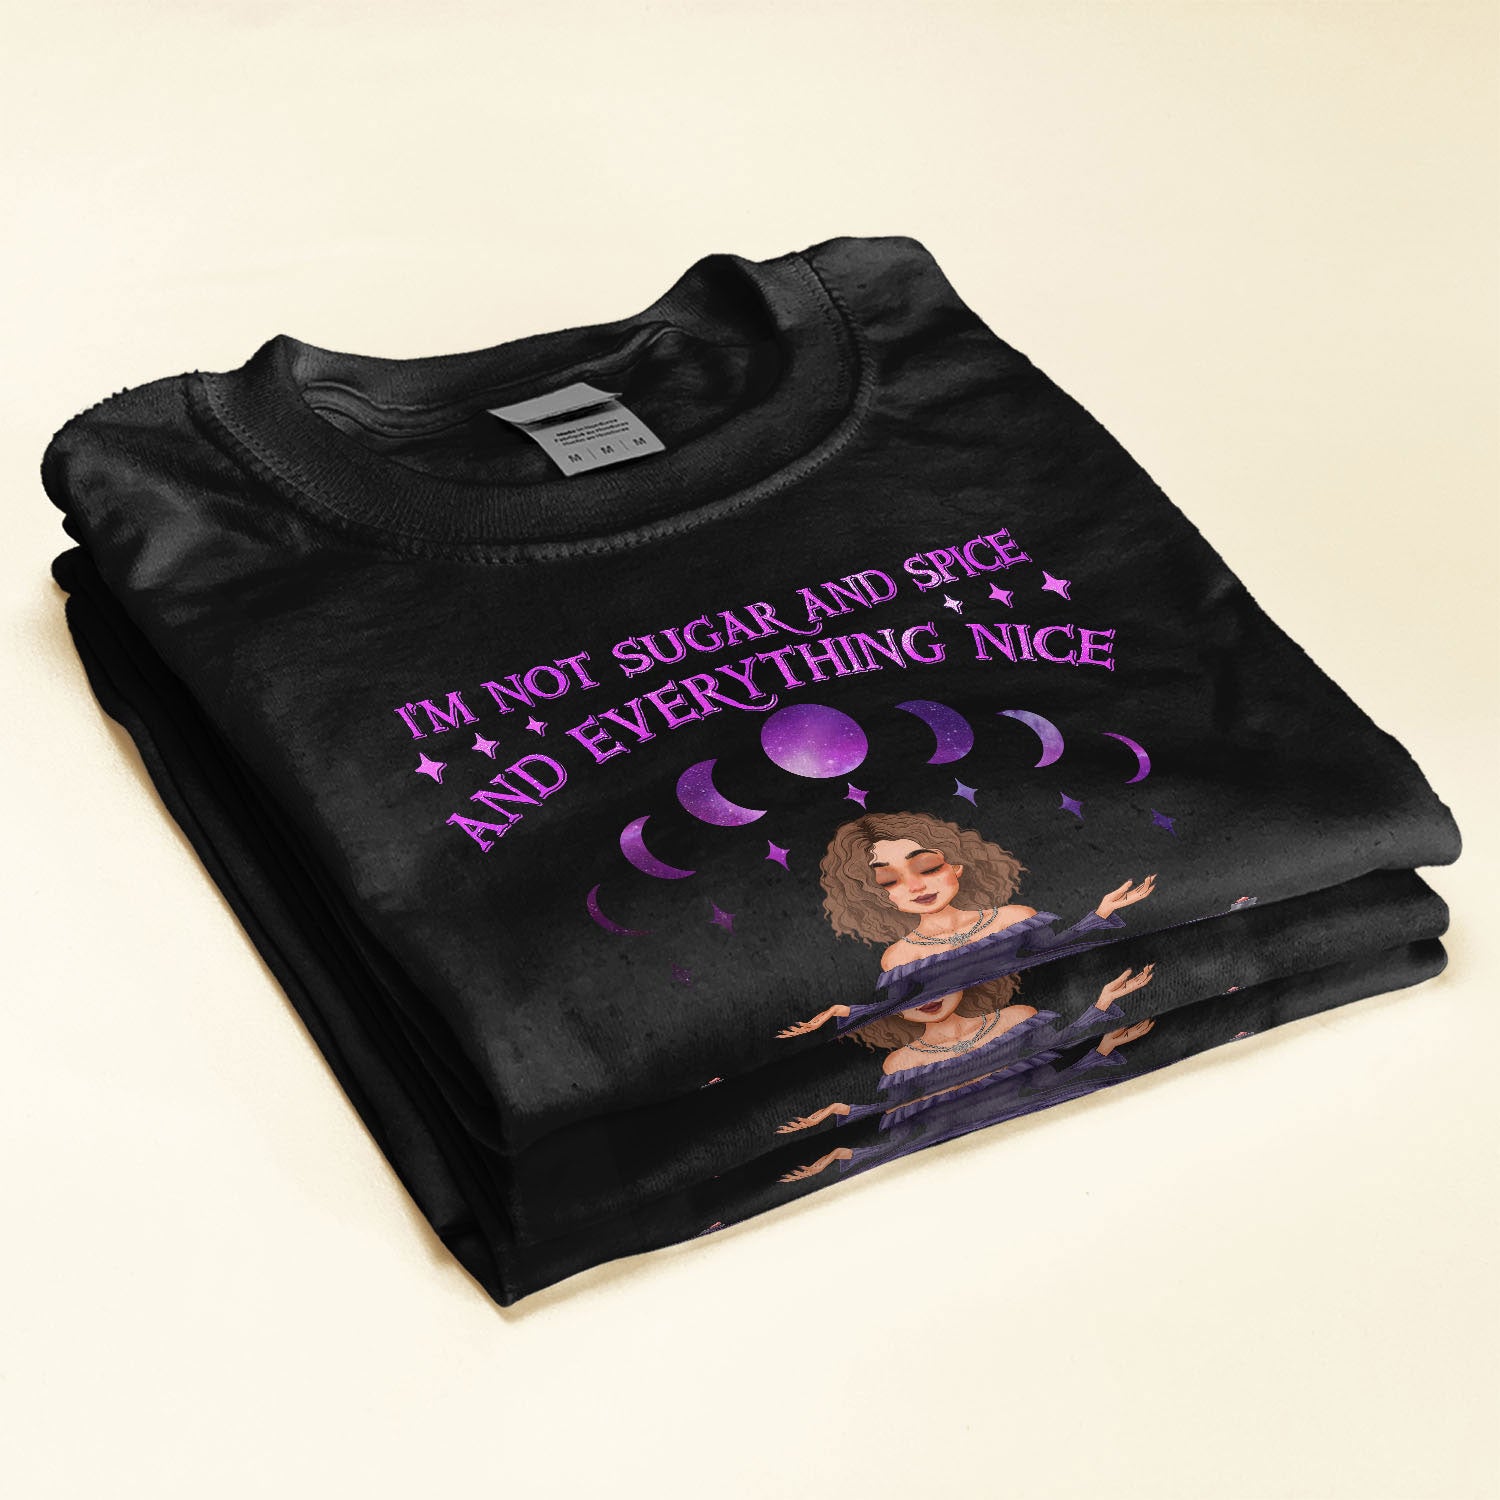 https://macorner.co/cdn/shop/products/IM-Not-Sugar-And-Spice-And-Everything-Nice-Personalized-Shirt-Halloween-Birthday.-FunnyGift-For-Witch-Woman-Girl--Witch-Craft-Grimoire-2.jpg?v=1660705139&width=1946